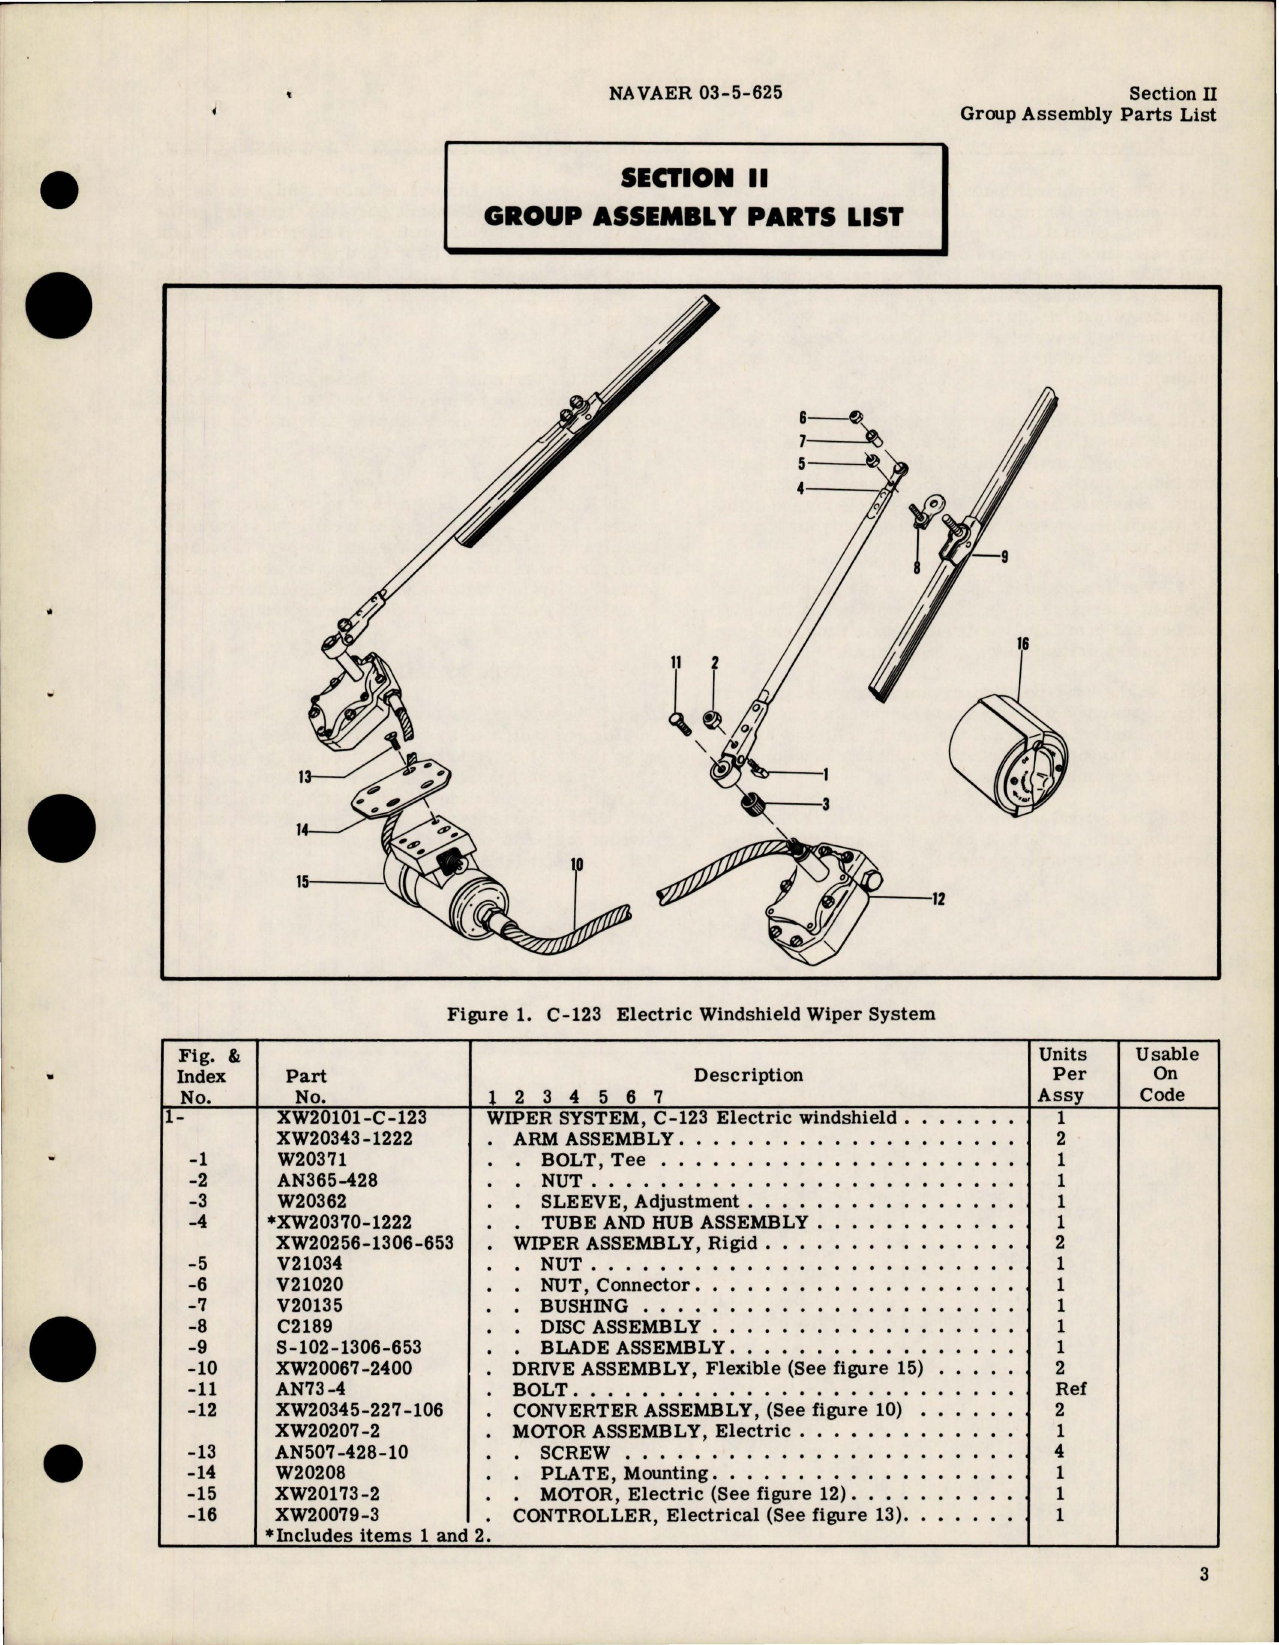 Sample page 5 from AirCorps Library document: Illustrated Parts Breakdown for Electric Windshield Wiper Systems 